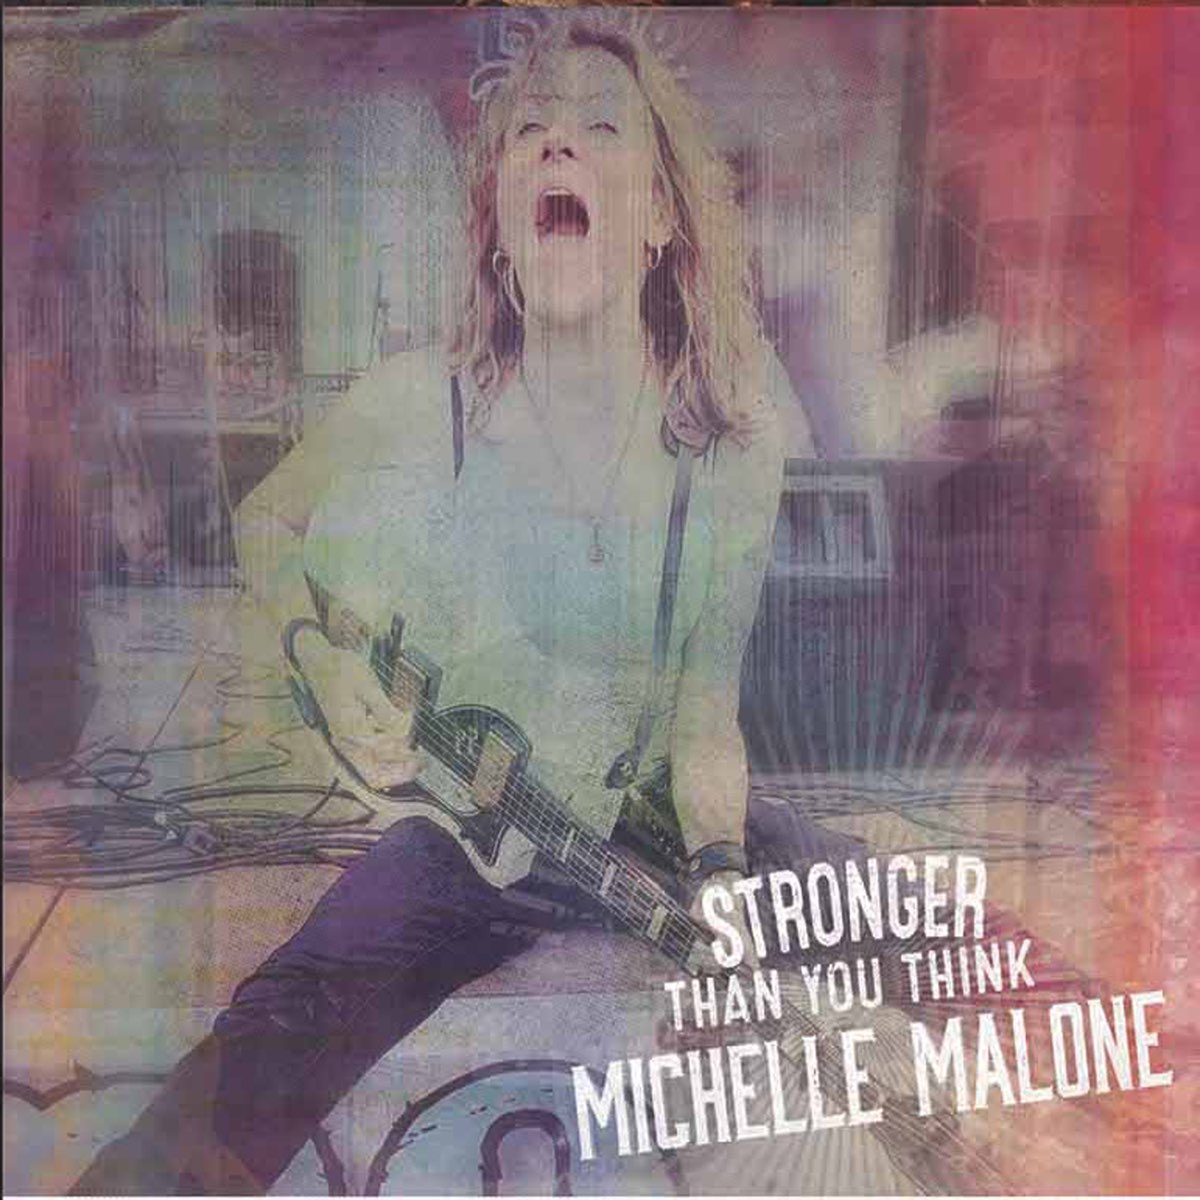 Stronger than you cover. Michelle Malone 2015 stronger than you think. Michelle Malone 2009 debris. Michelle Malone Sugarfoot. Shayne Malone discography.